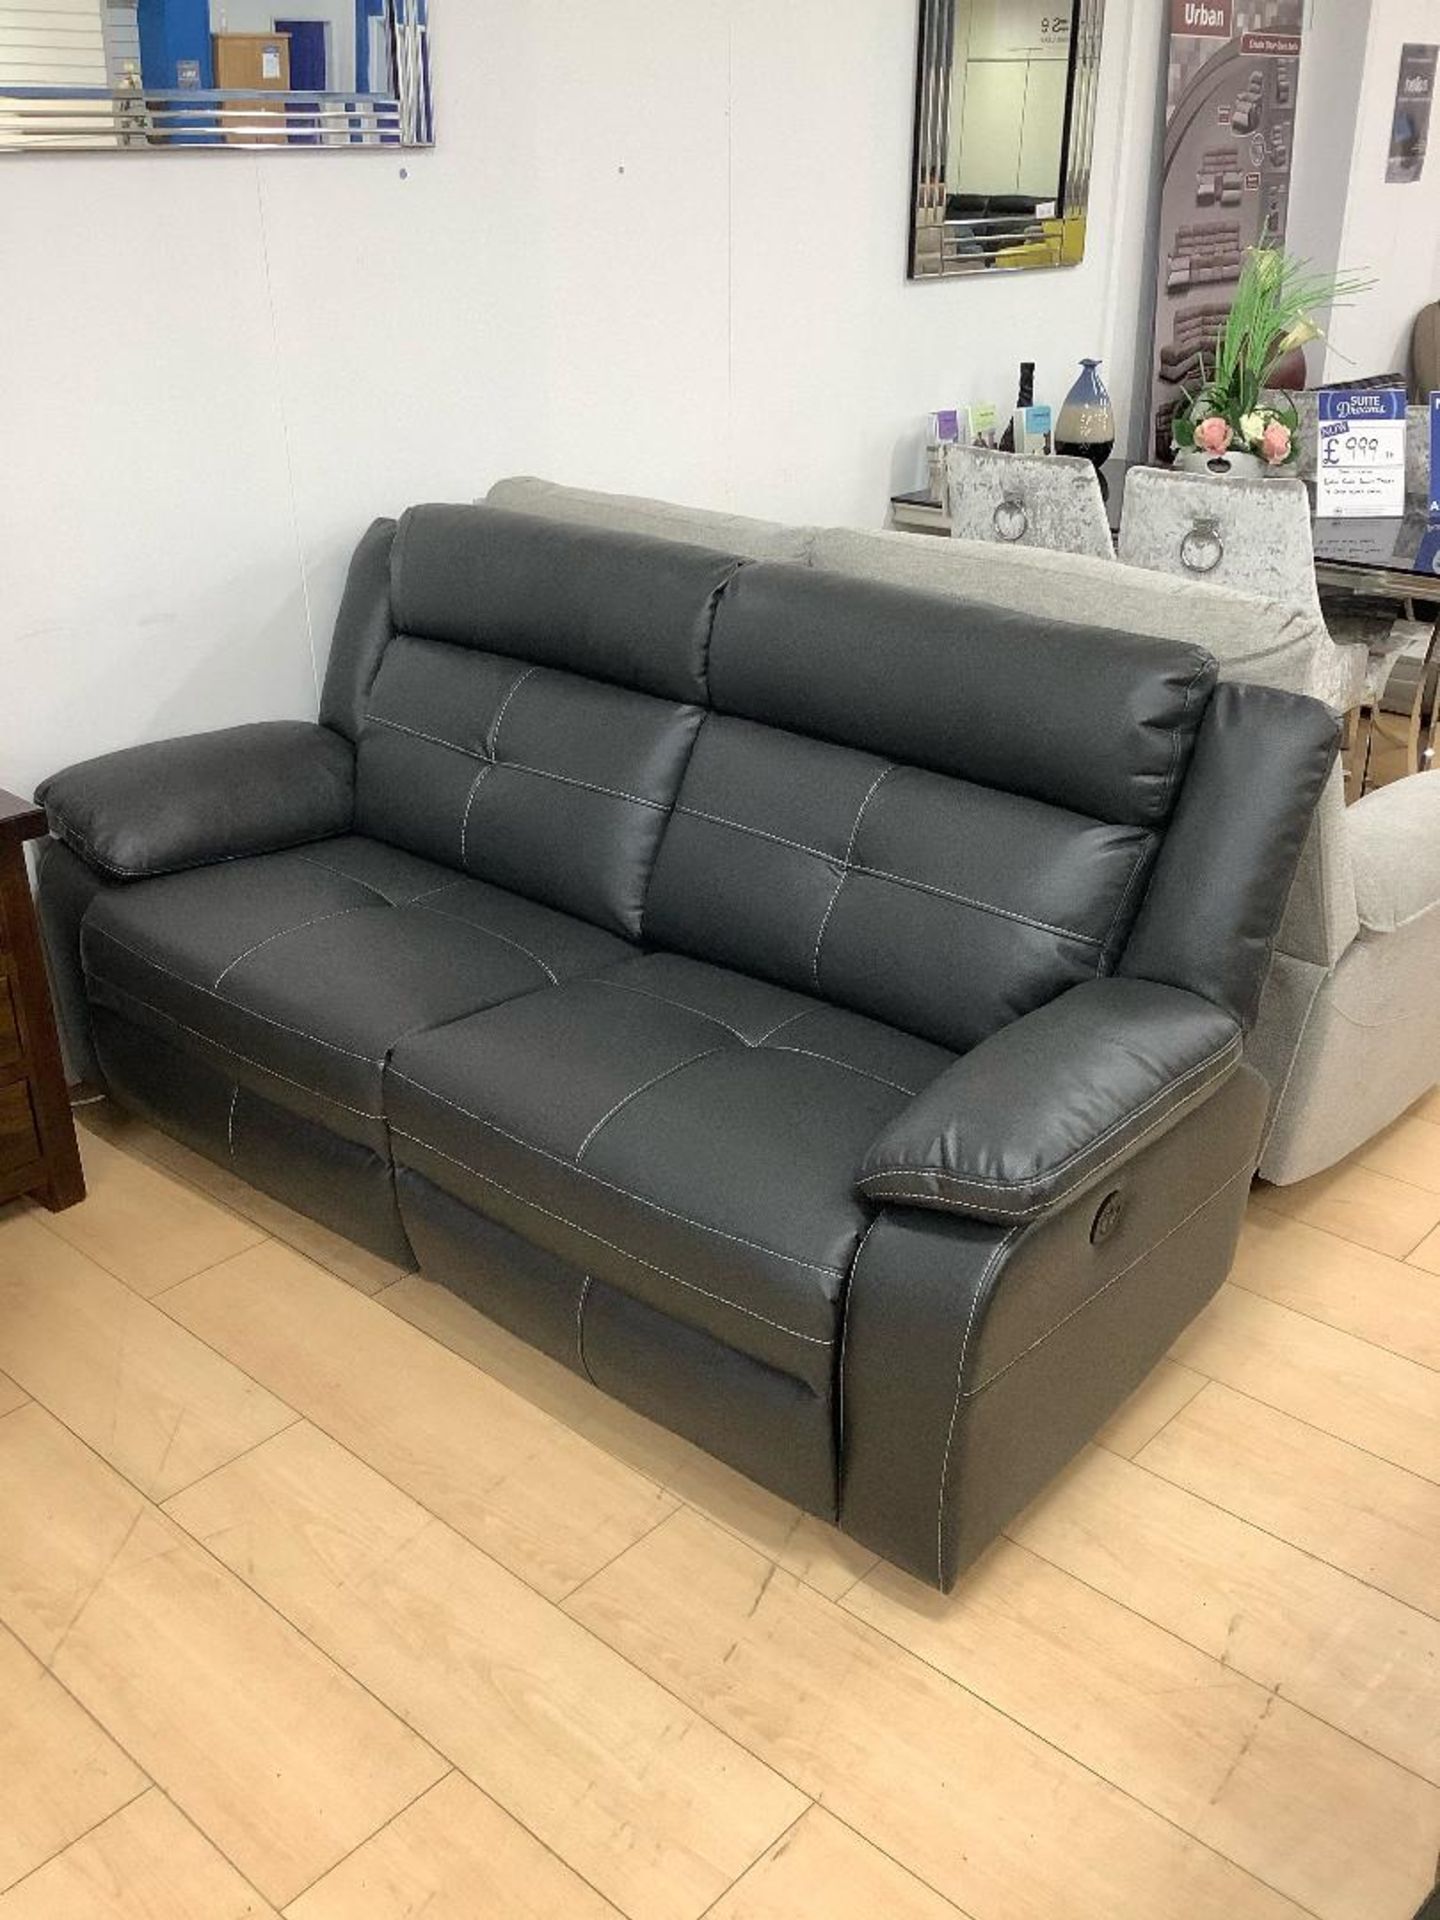 Brand new boxed 3 seater plus 2 seater harveys langdale reclining sofas